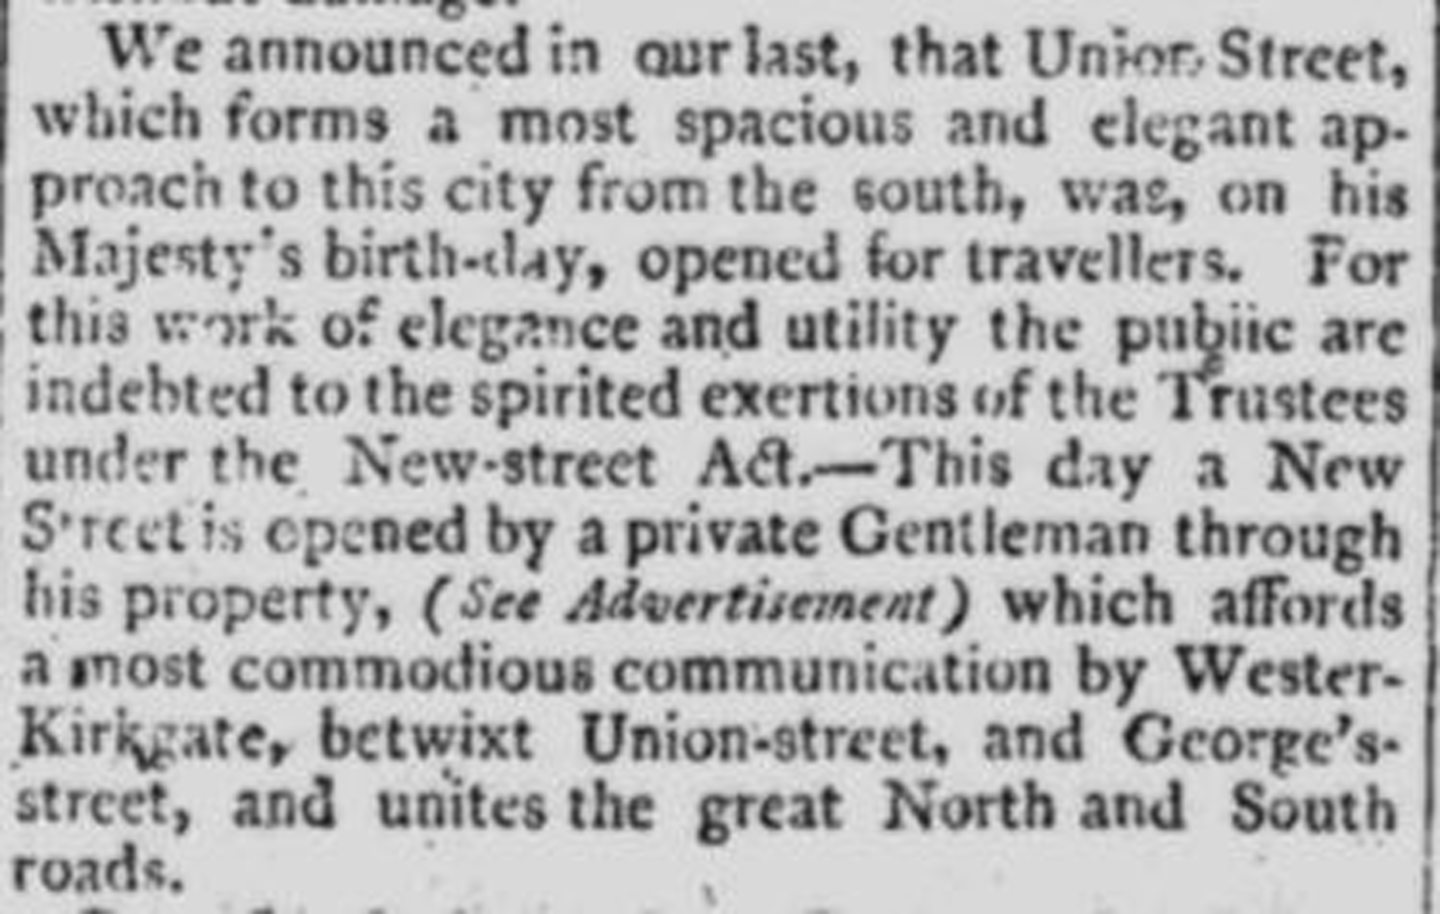 A snippet from The Aberdeen Journal in 1805 which reported on the opening of Aberdeen's Union Street